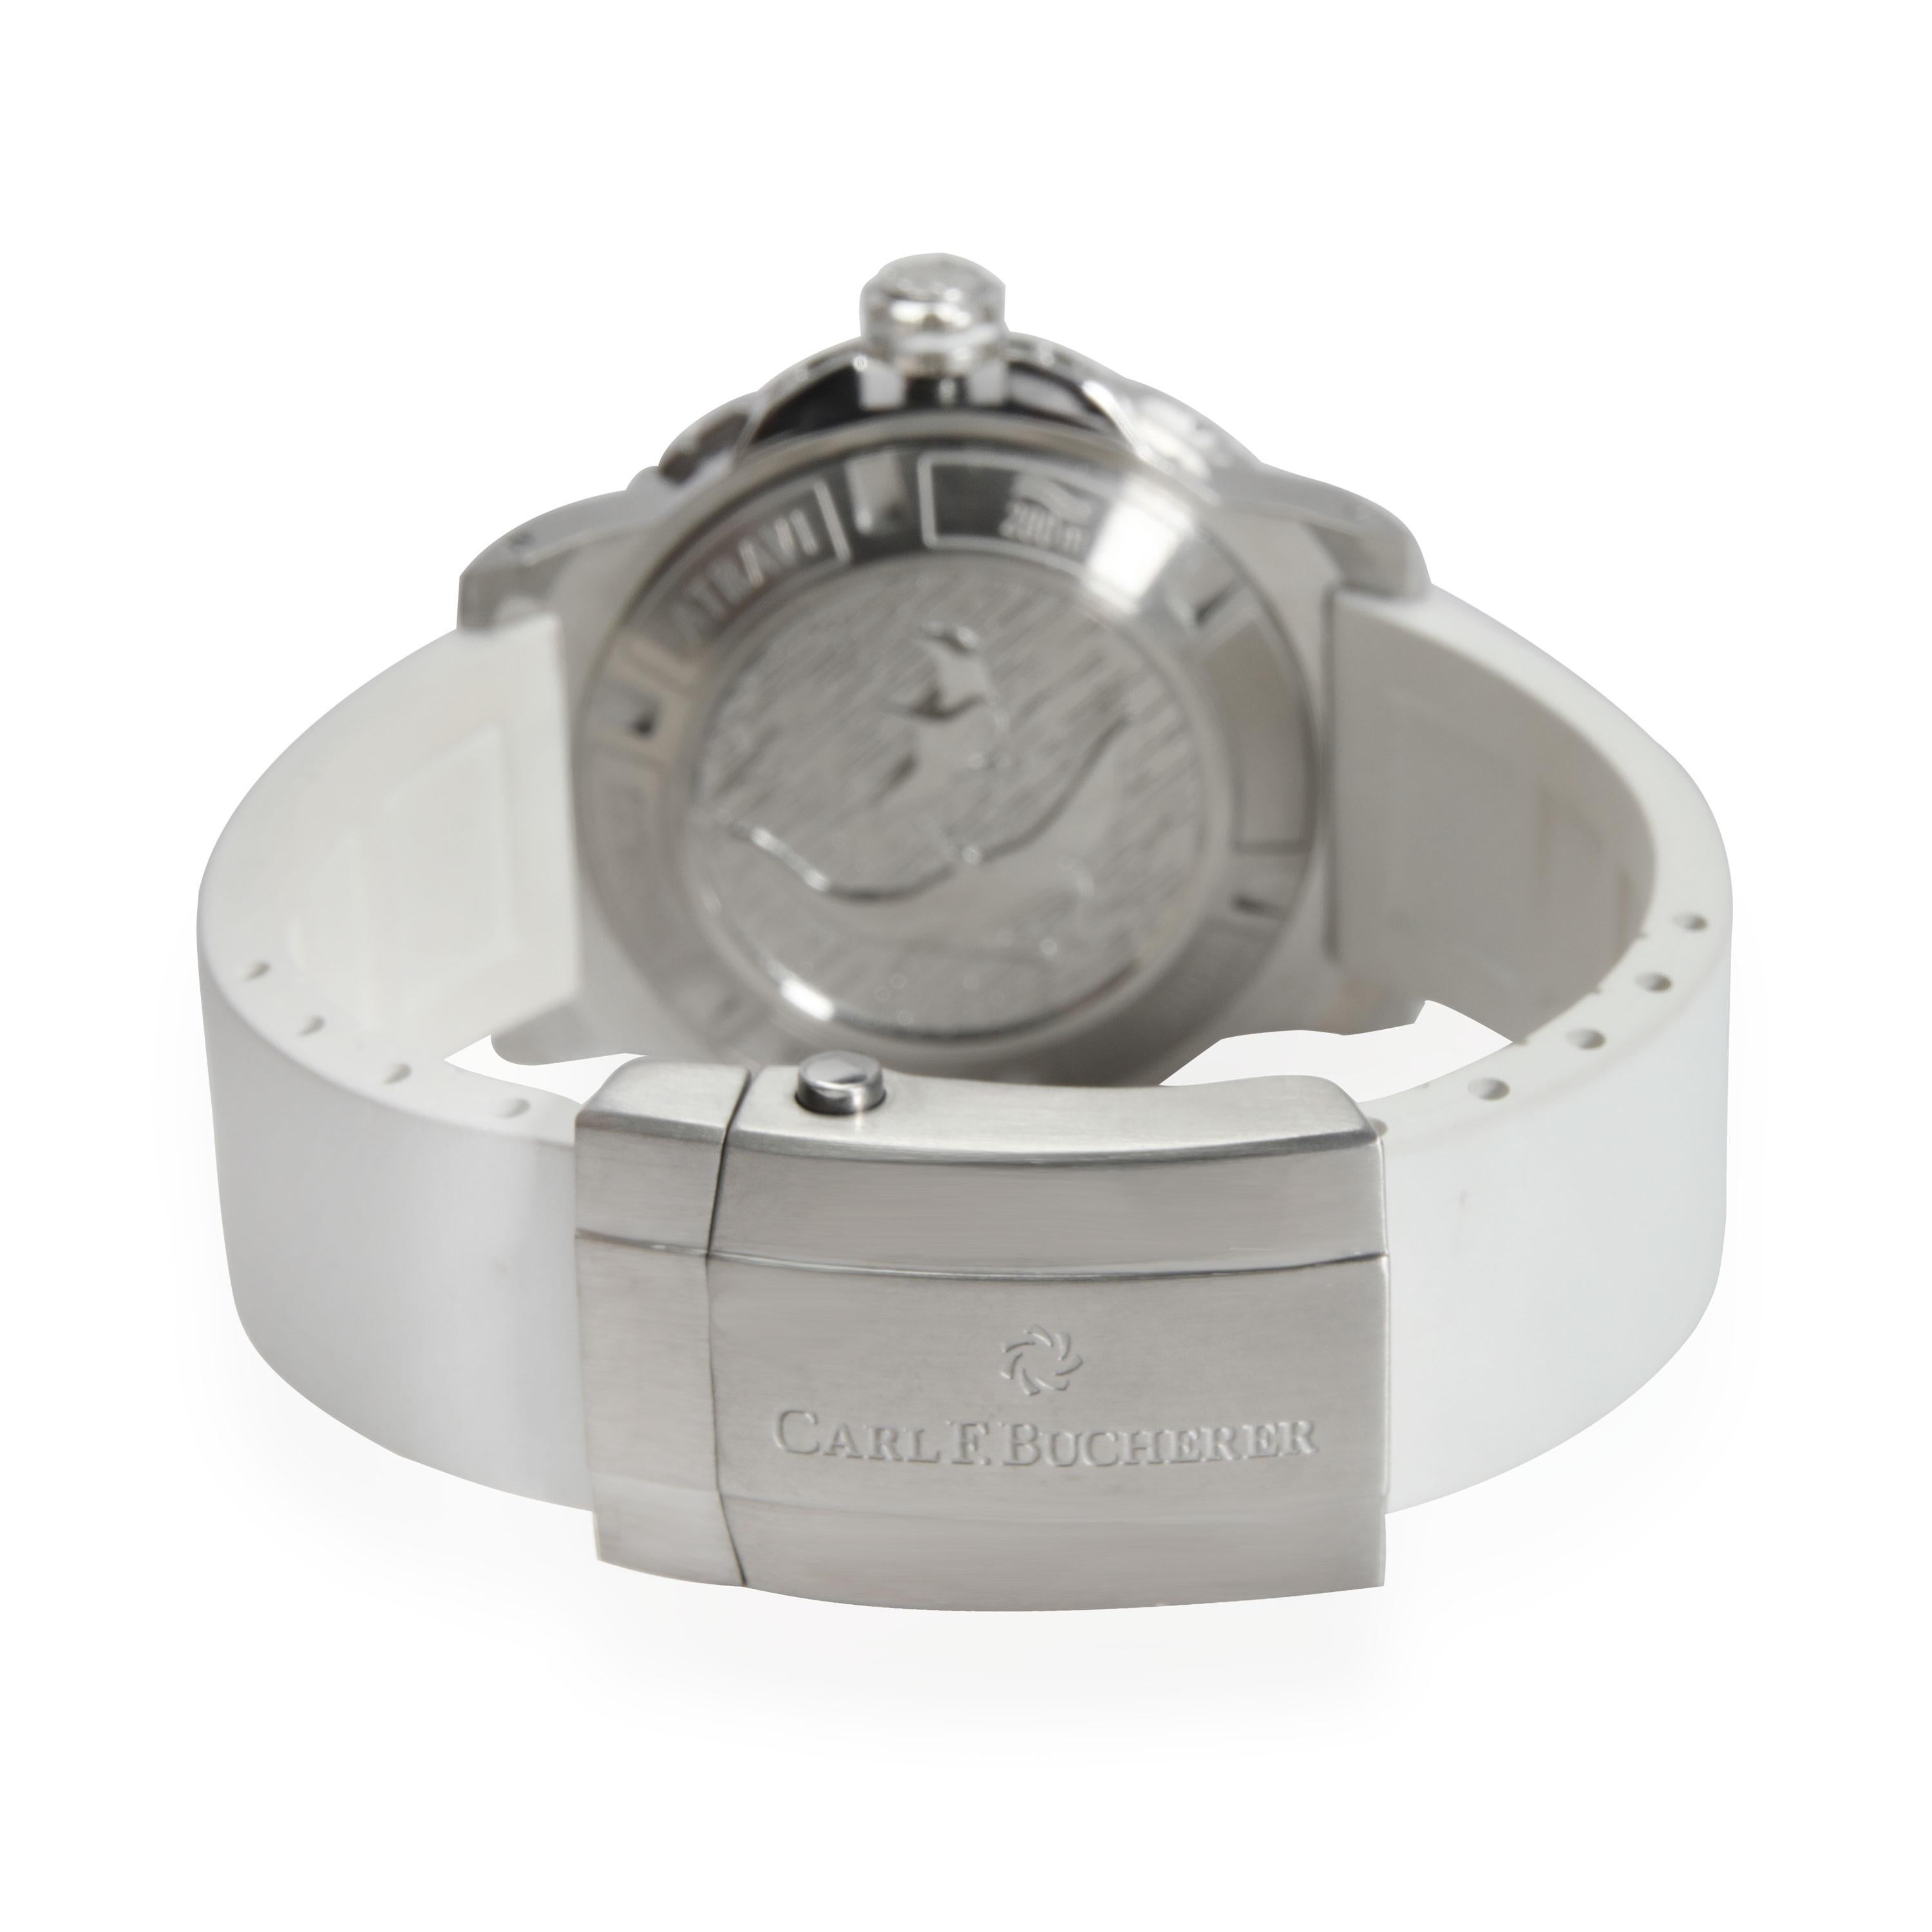 Bucherer ScubaTec 00.10634.23.23.03 Women's Watch in Stainless Steel SKU: 109966 PRIMARY DETAILS Brand: Bucherer Model: ScubaTec Country of Origin: Switzerland Movement Type: Mechanical: Automatic/Kinetic Year of Manufacture: 2010-2019 Condition: